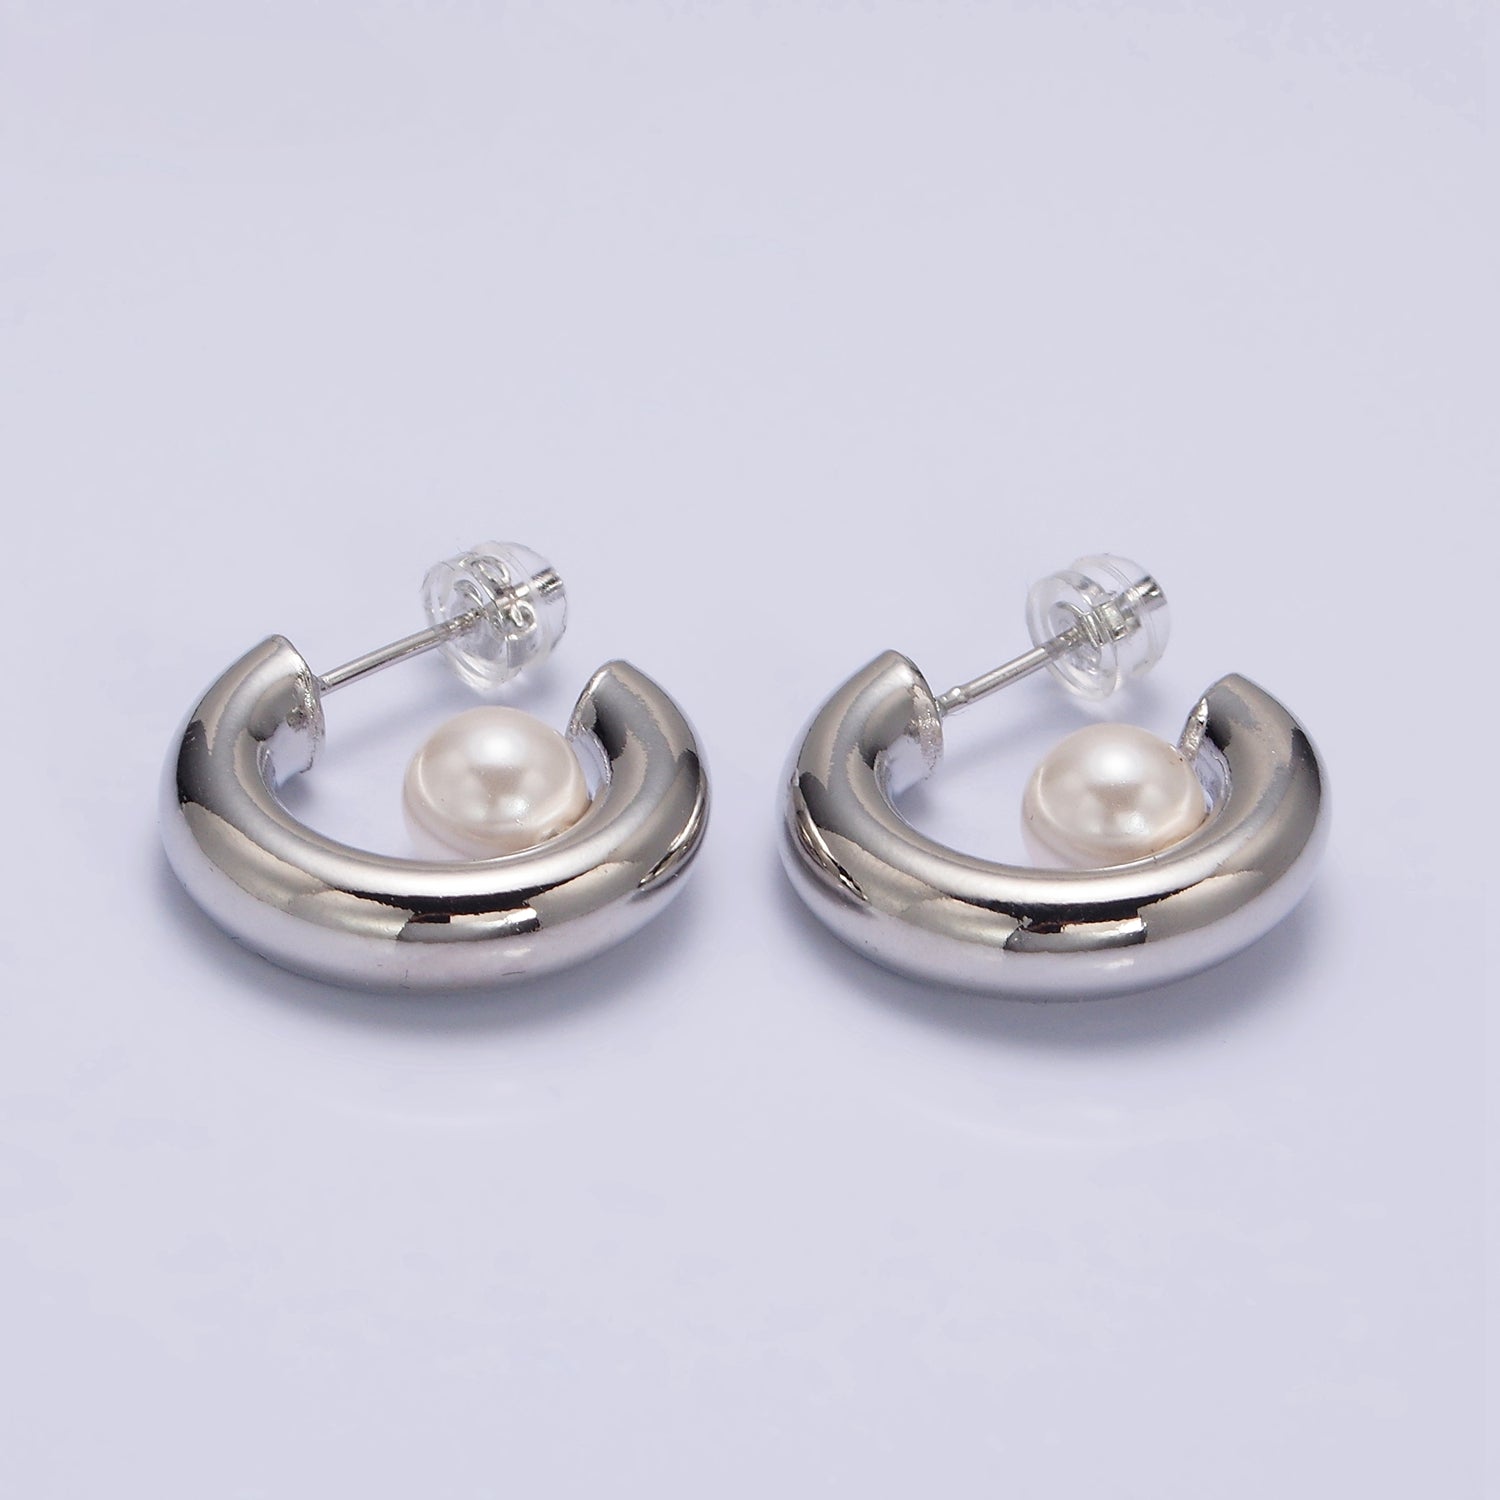 16K Gold Filled 20mm Chubby Round White Pearl C-Shaped Hoop Earrings in Gold & Silver | AE-572 AE-573